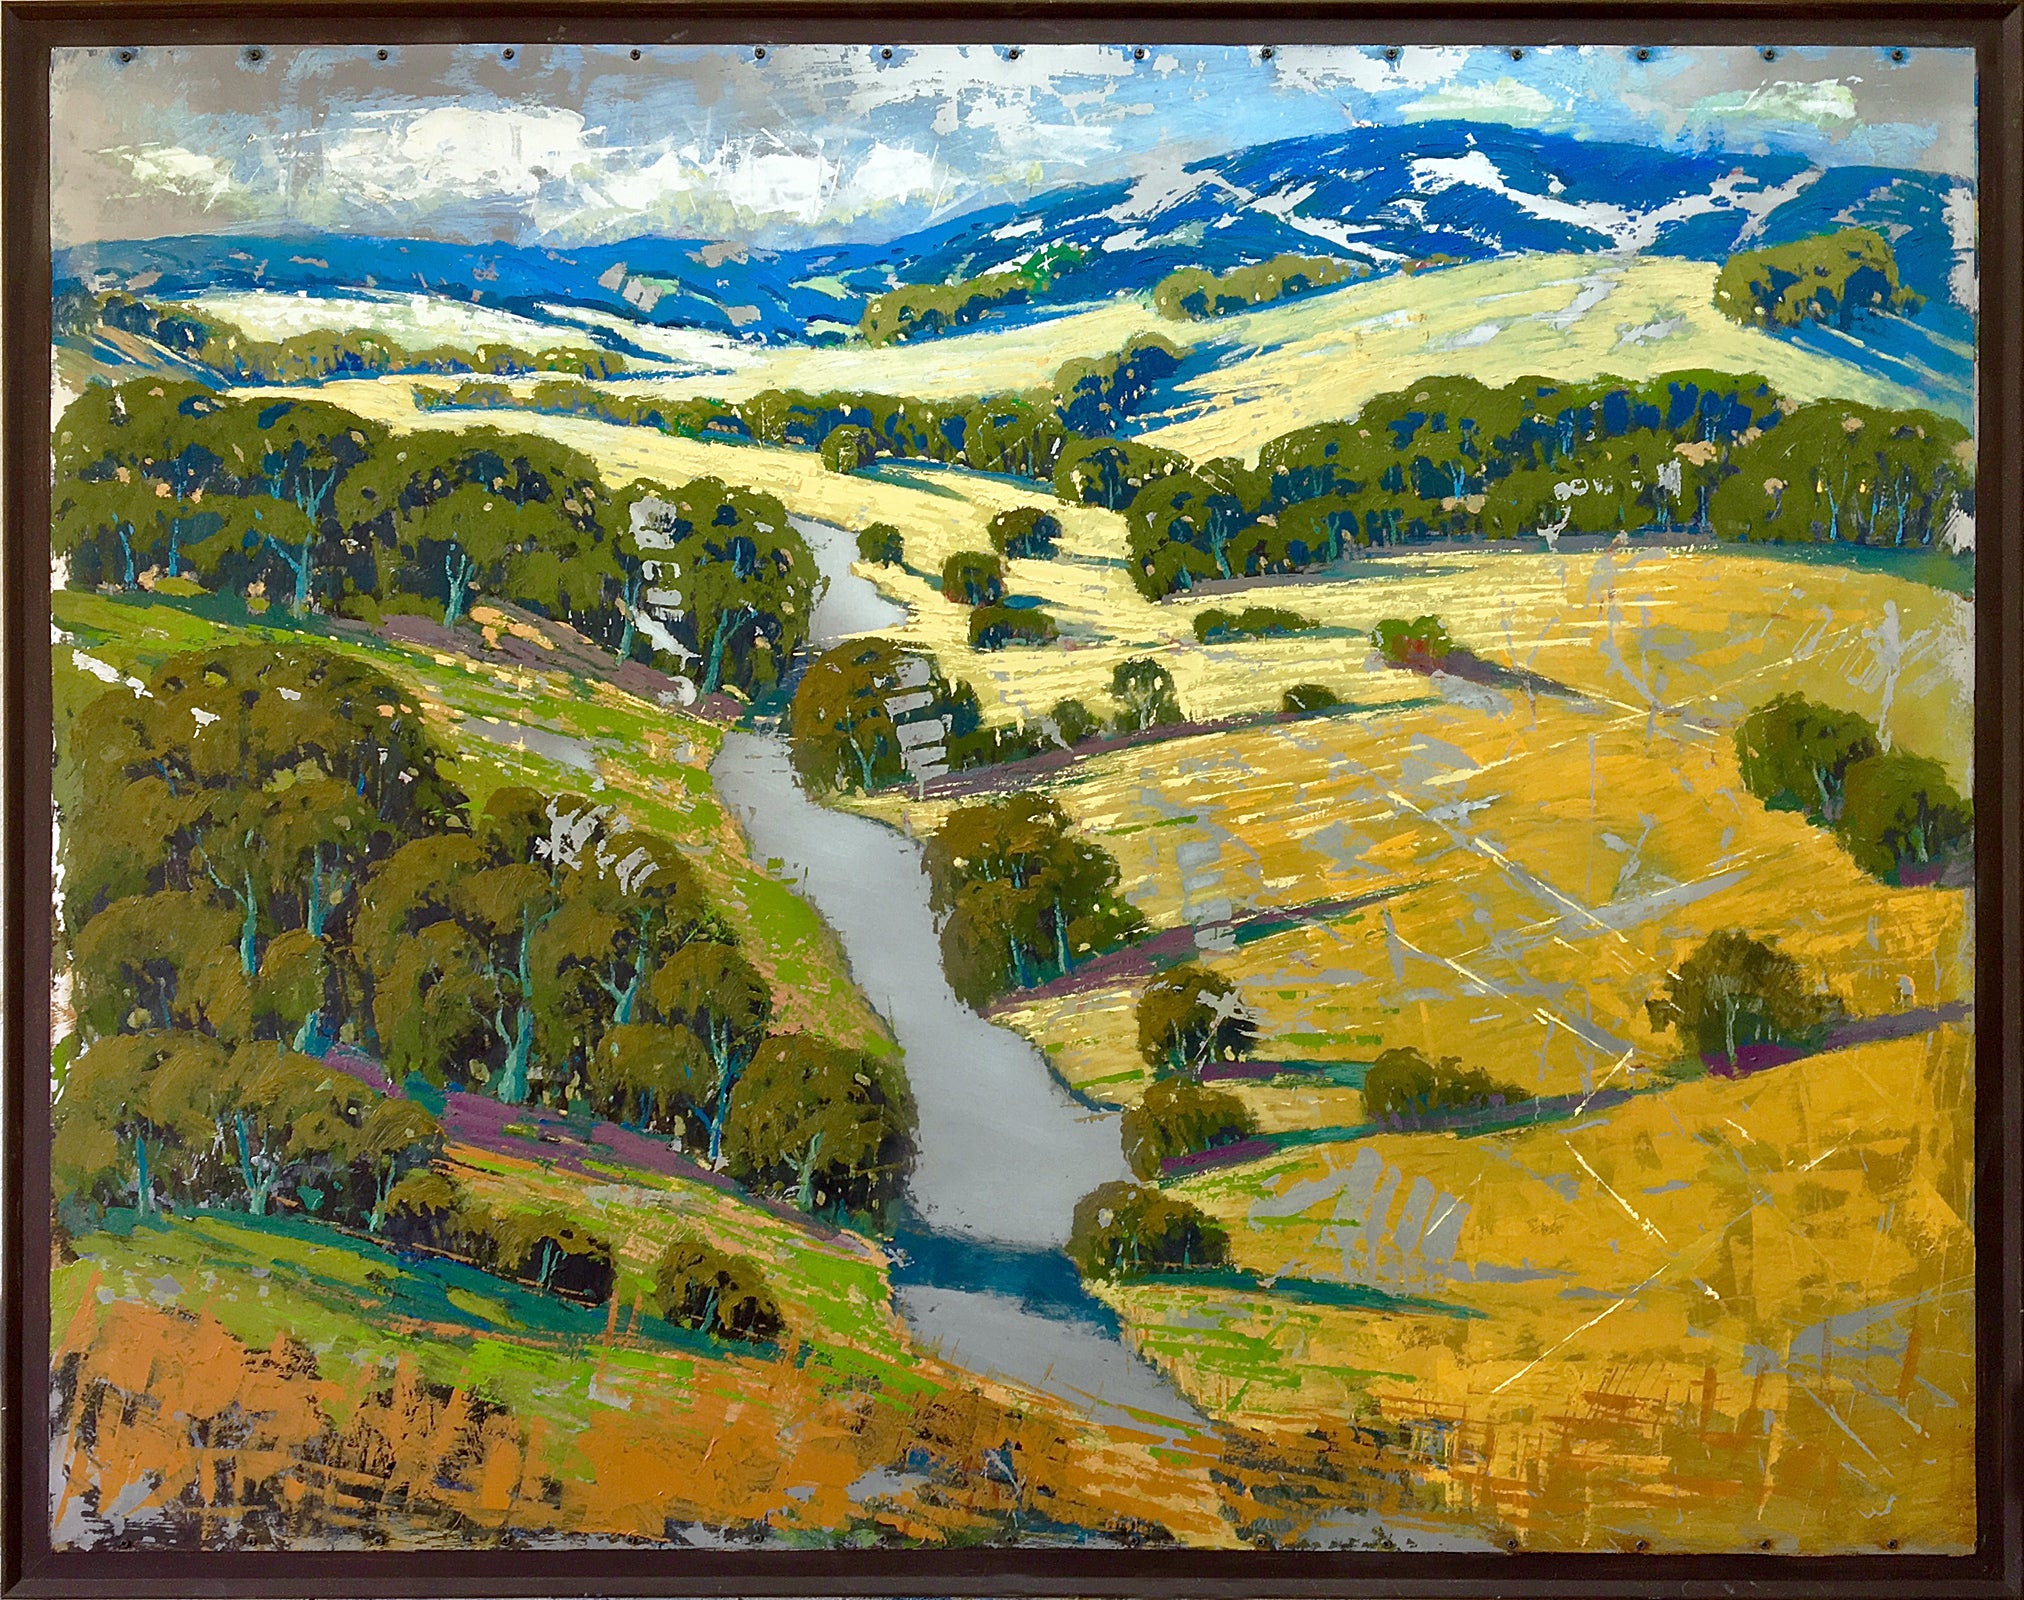 Above The Russian River 51x64